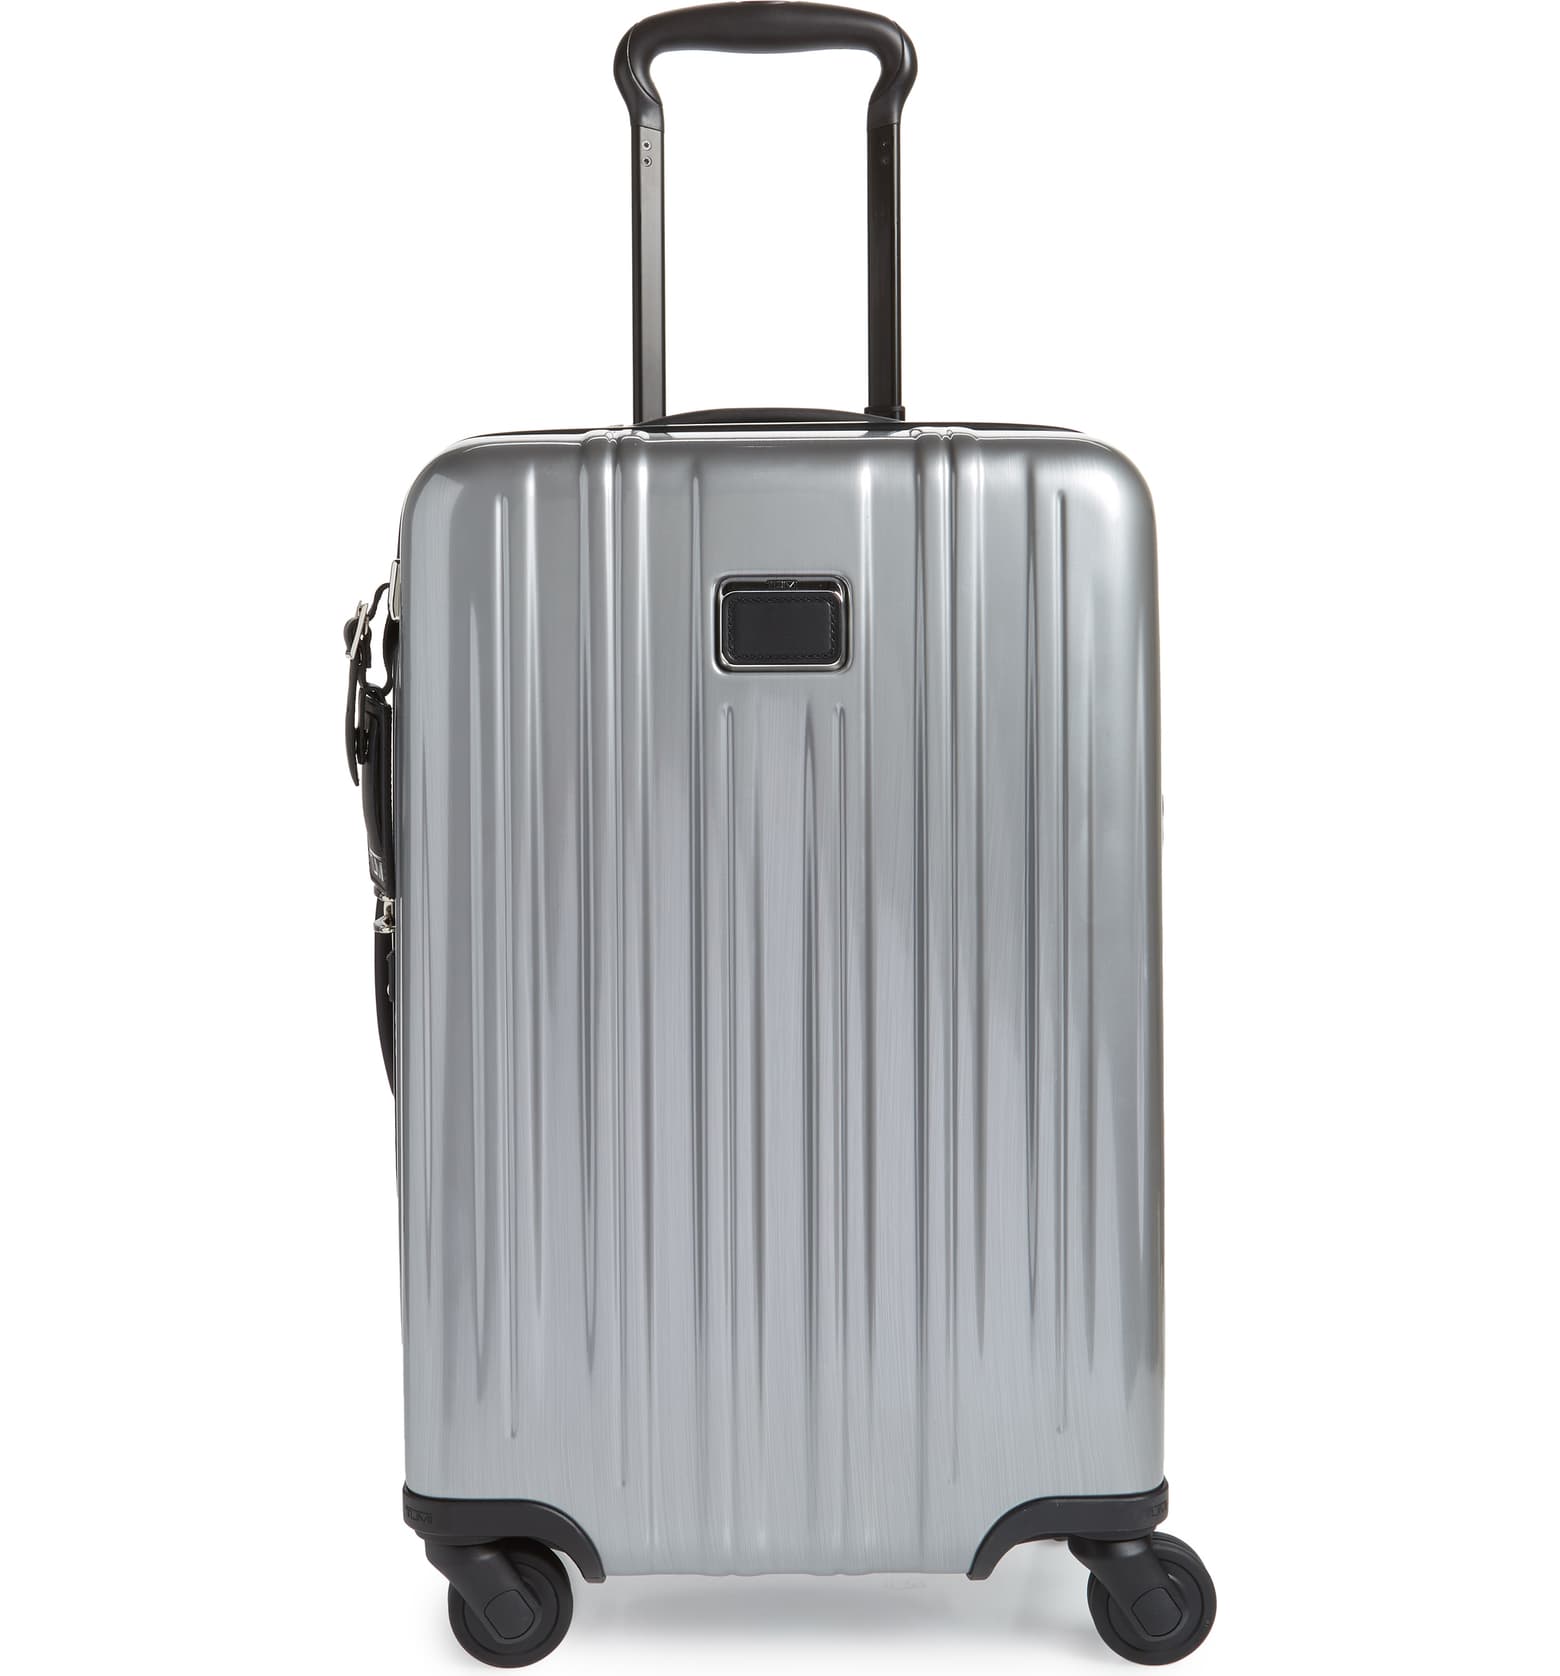 a silver suitcase with wheels